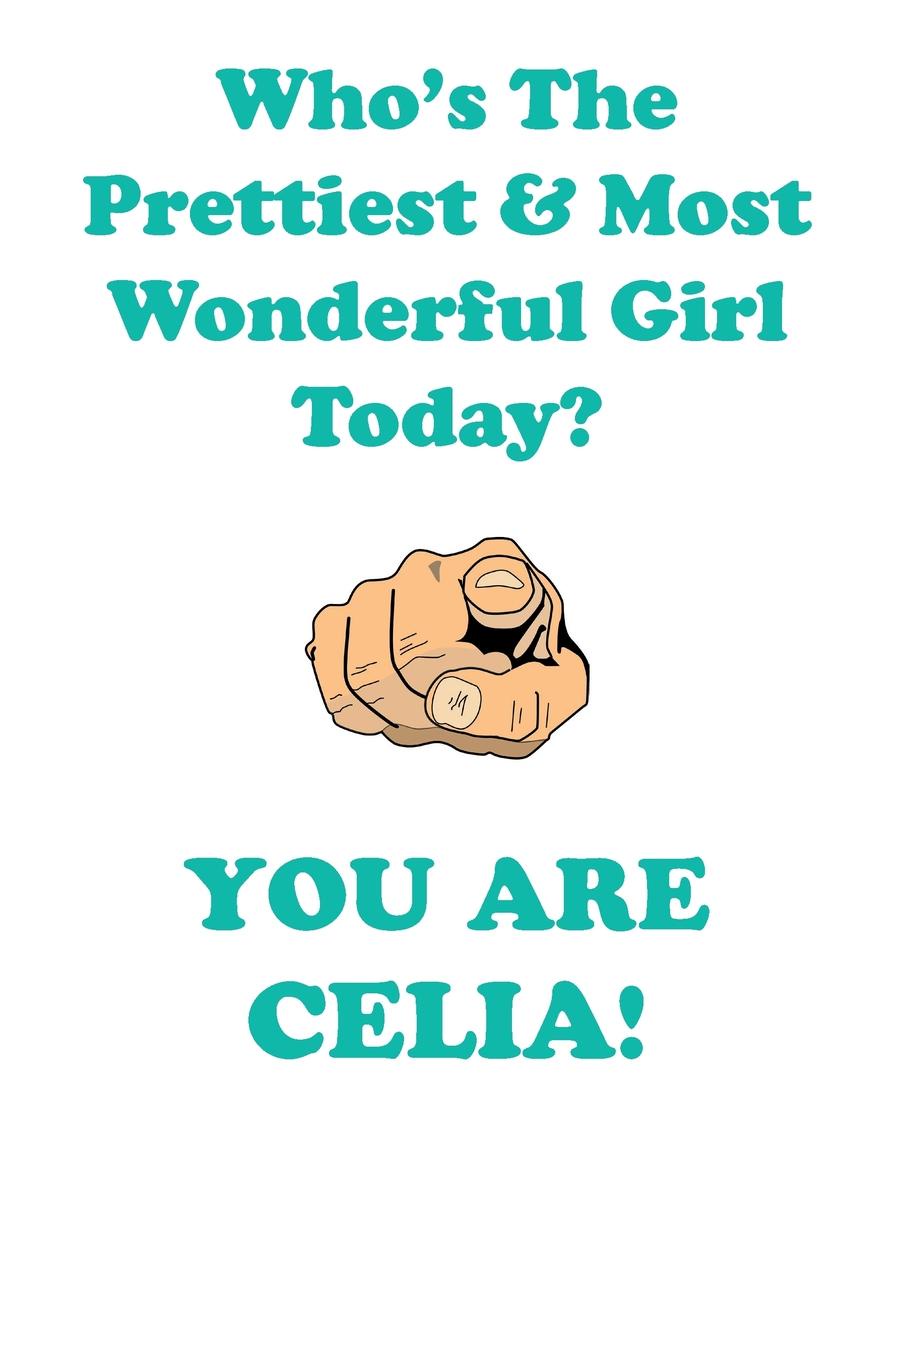 CELIA is The Prettiest Affirmations Workbook Positive Affirmations Workbook Includes. Mentoring Questions, Guidance, Supporting You